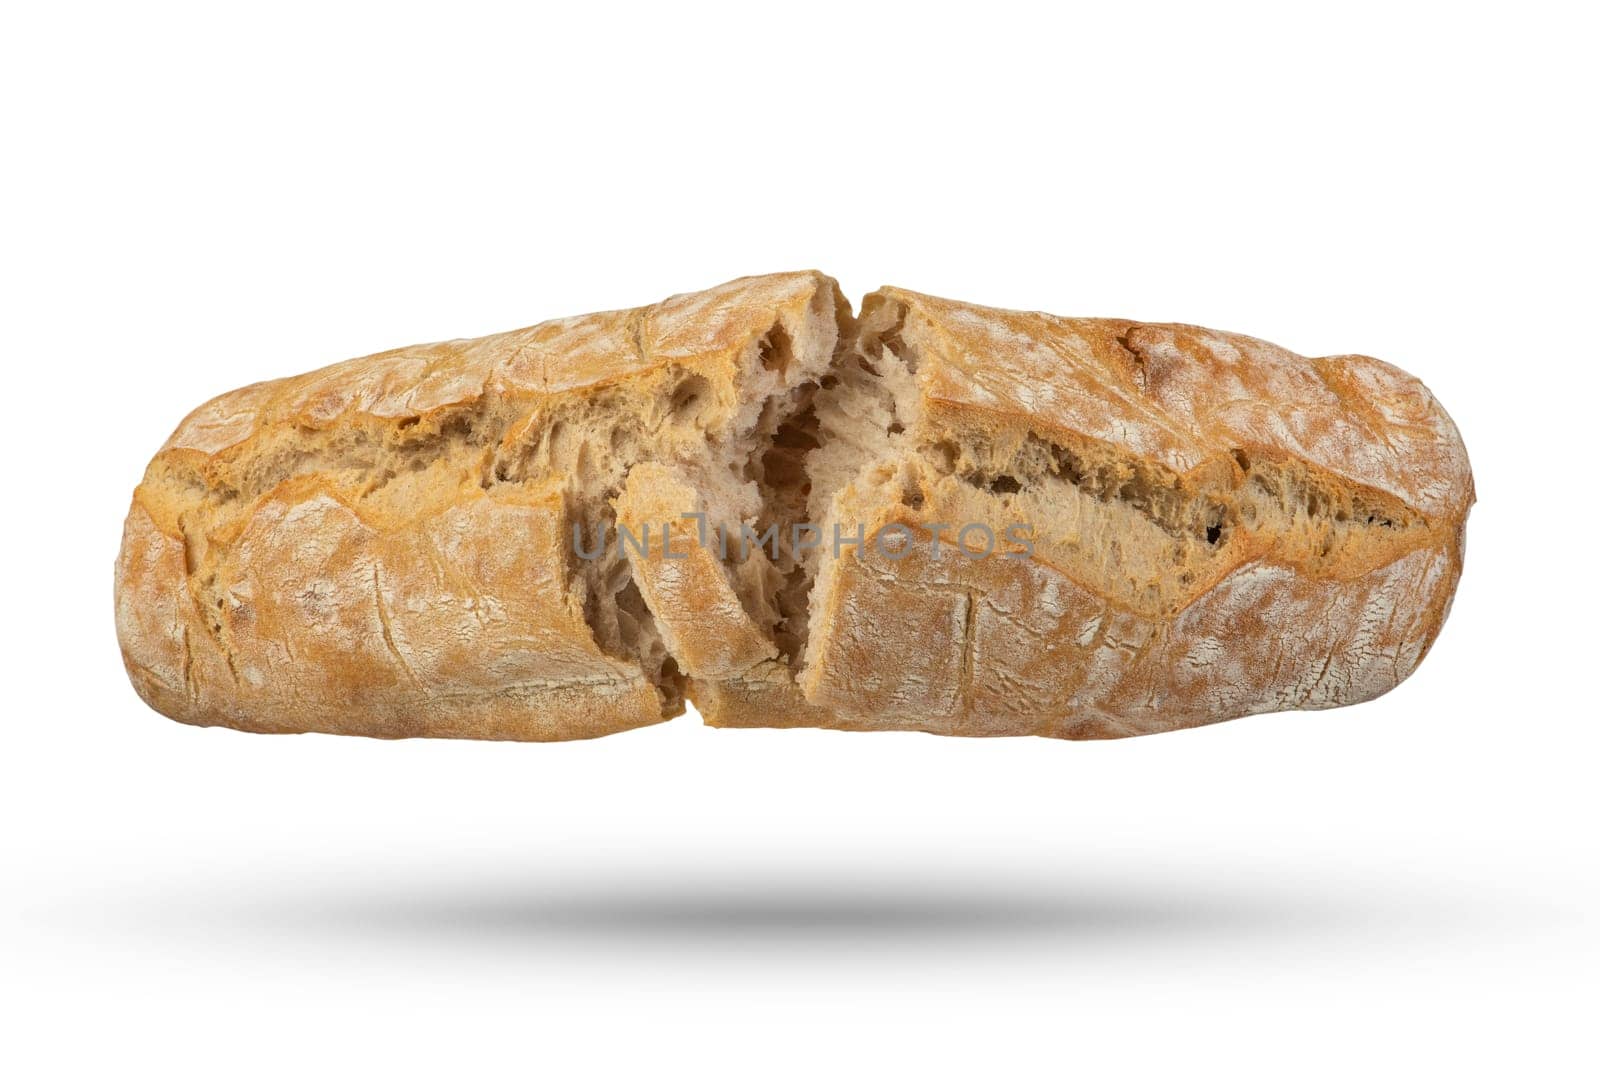 A loaf of Italian fresh ciabatta bread is broken into 2 parts on a white isolated background. Bread hanging or falling on a white background. Italian bread, top view